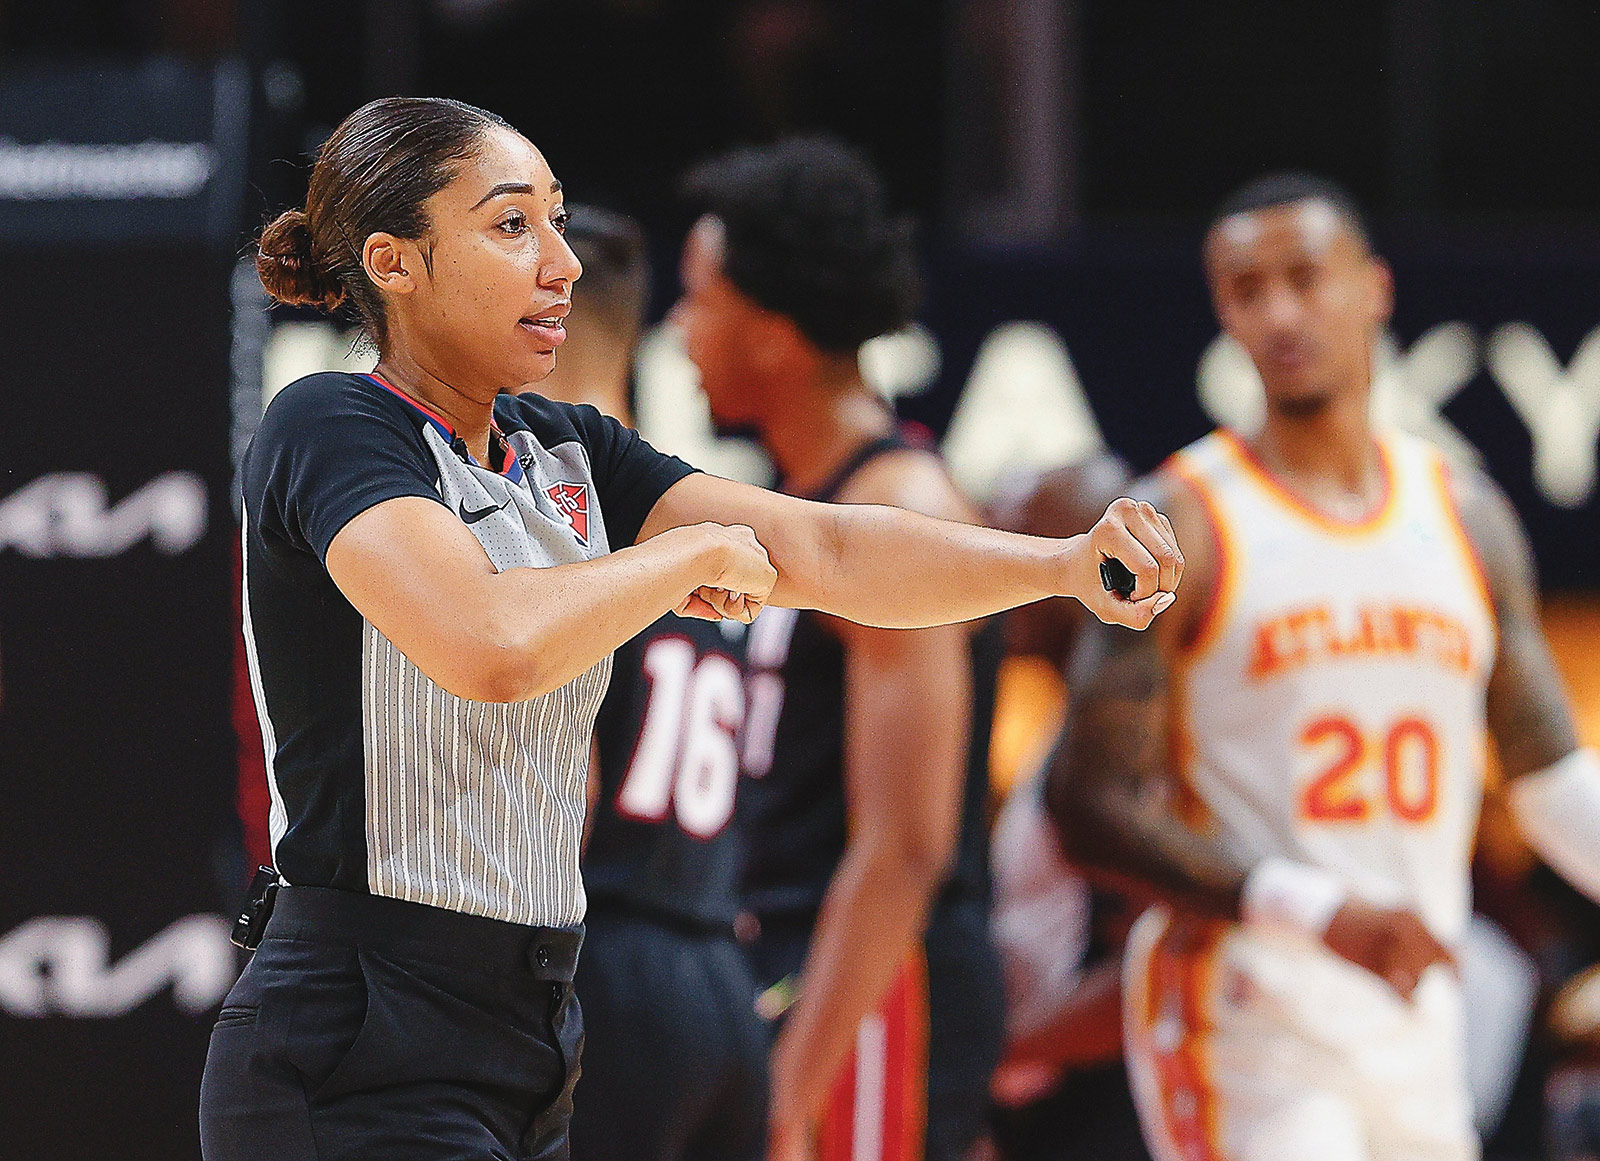 Simone Jelks refereeing at an NBA game.